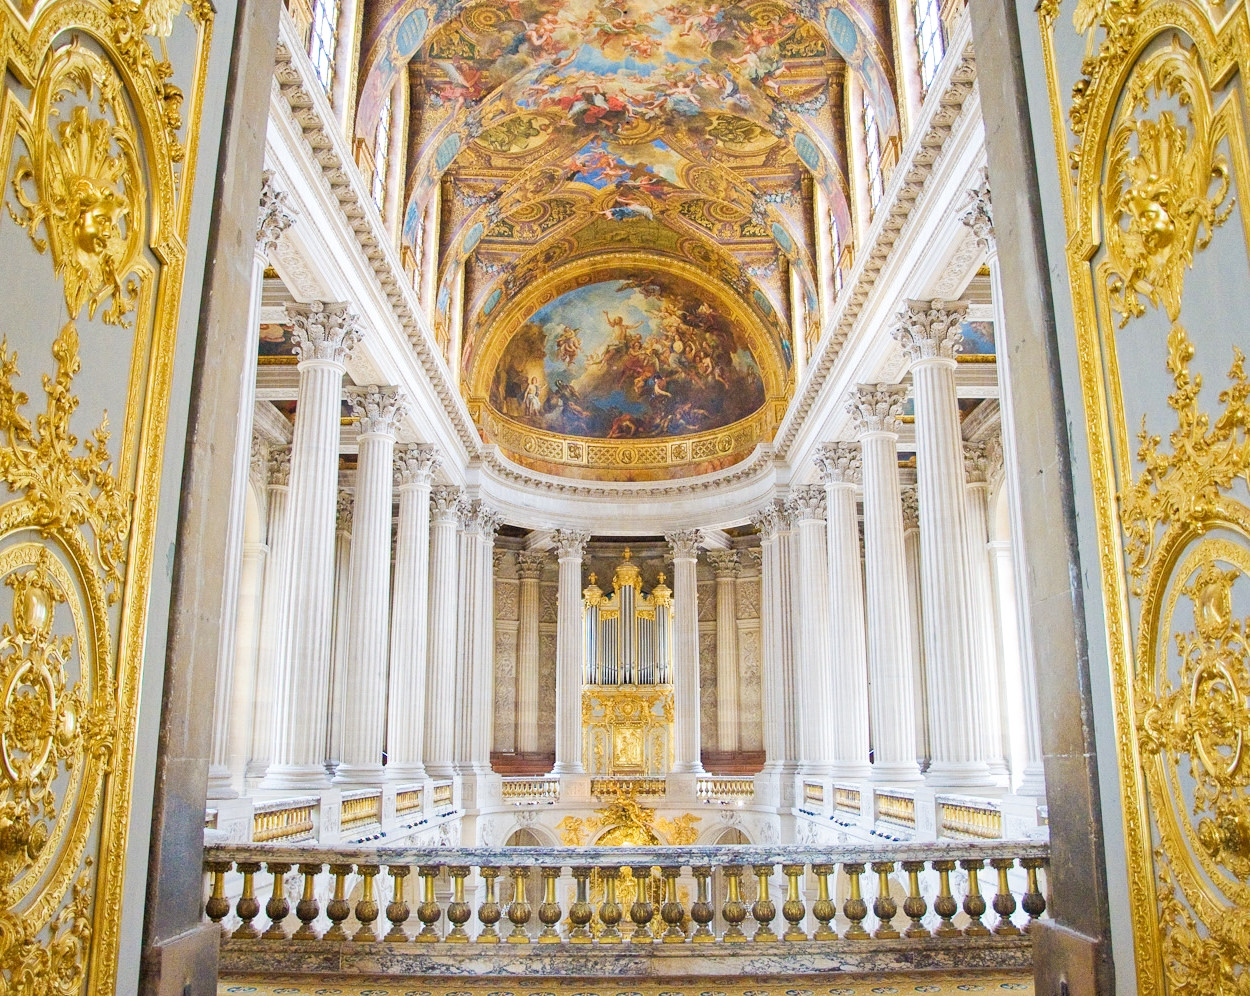 Chapel in Palace of versailles. Credit Thibault Chappe